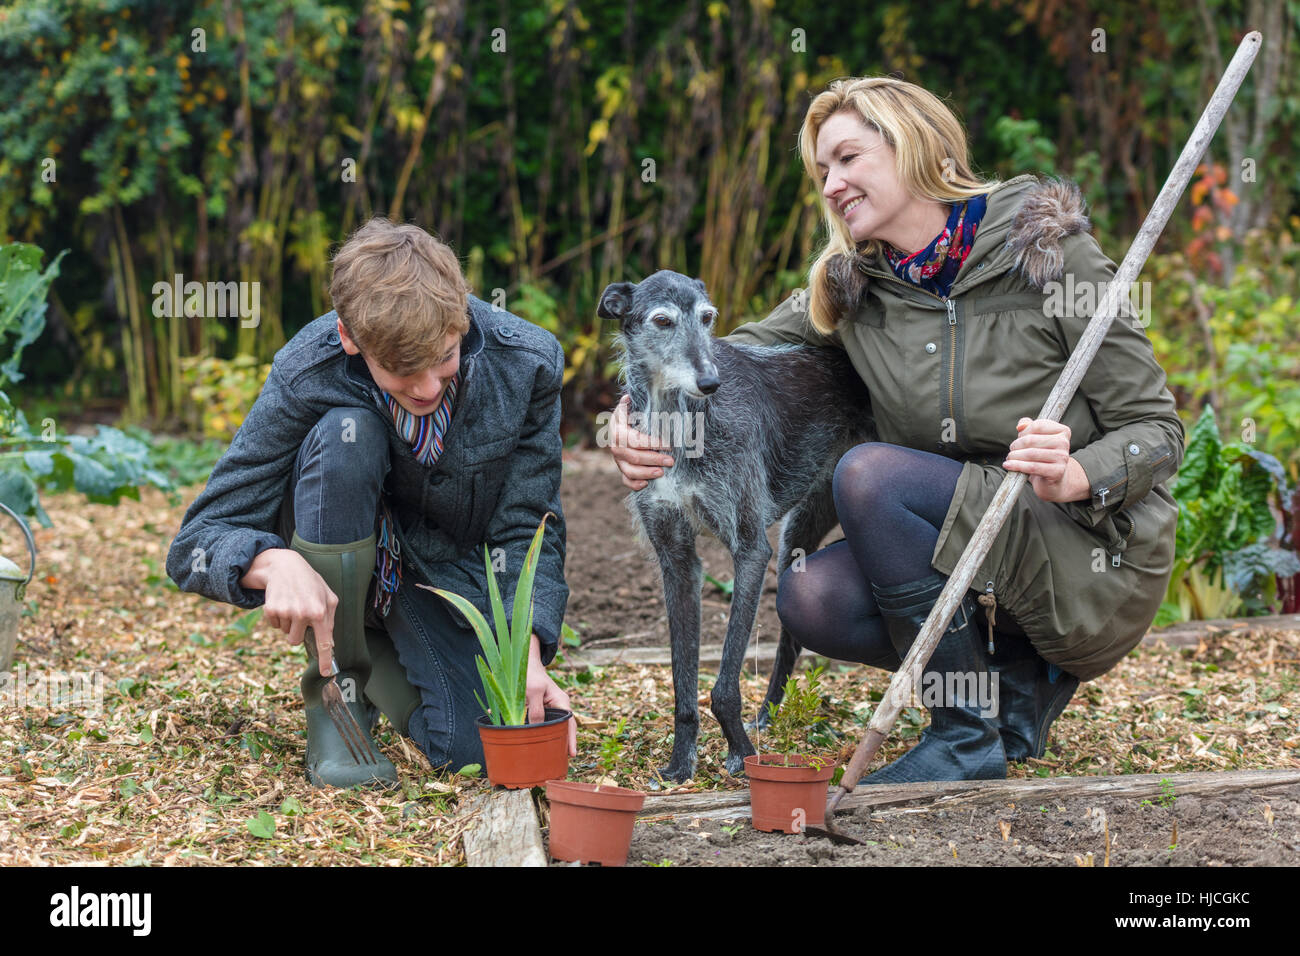 Happy smiling mother and teenage son, male boy child and woman gardening in a garden vegetable patch with their pet dog Stock Photo